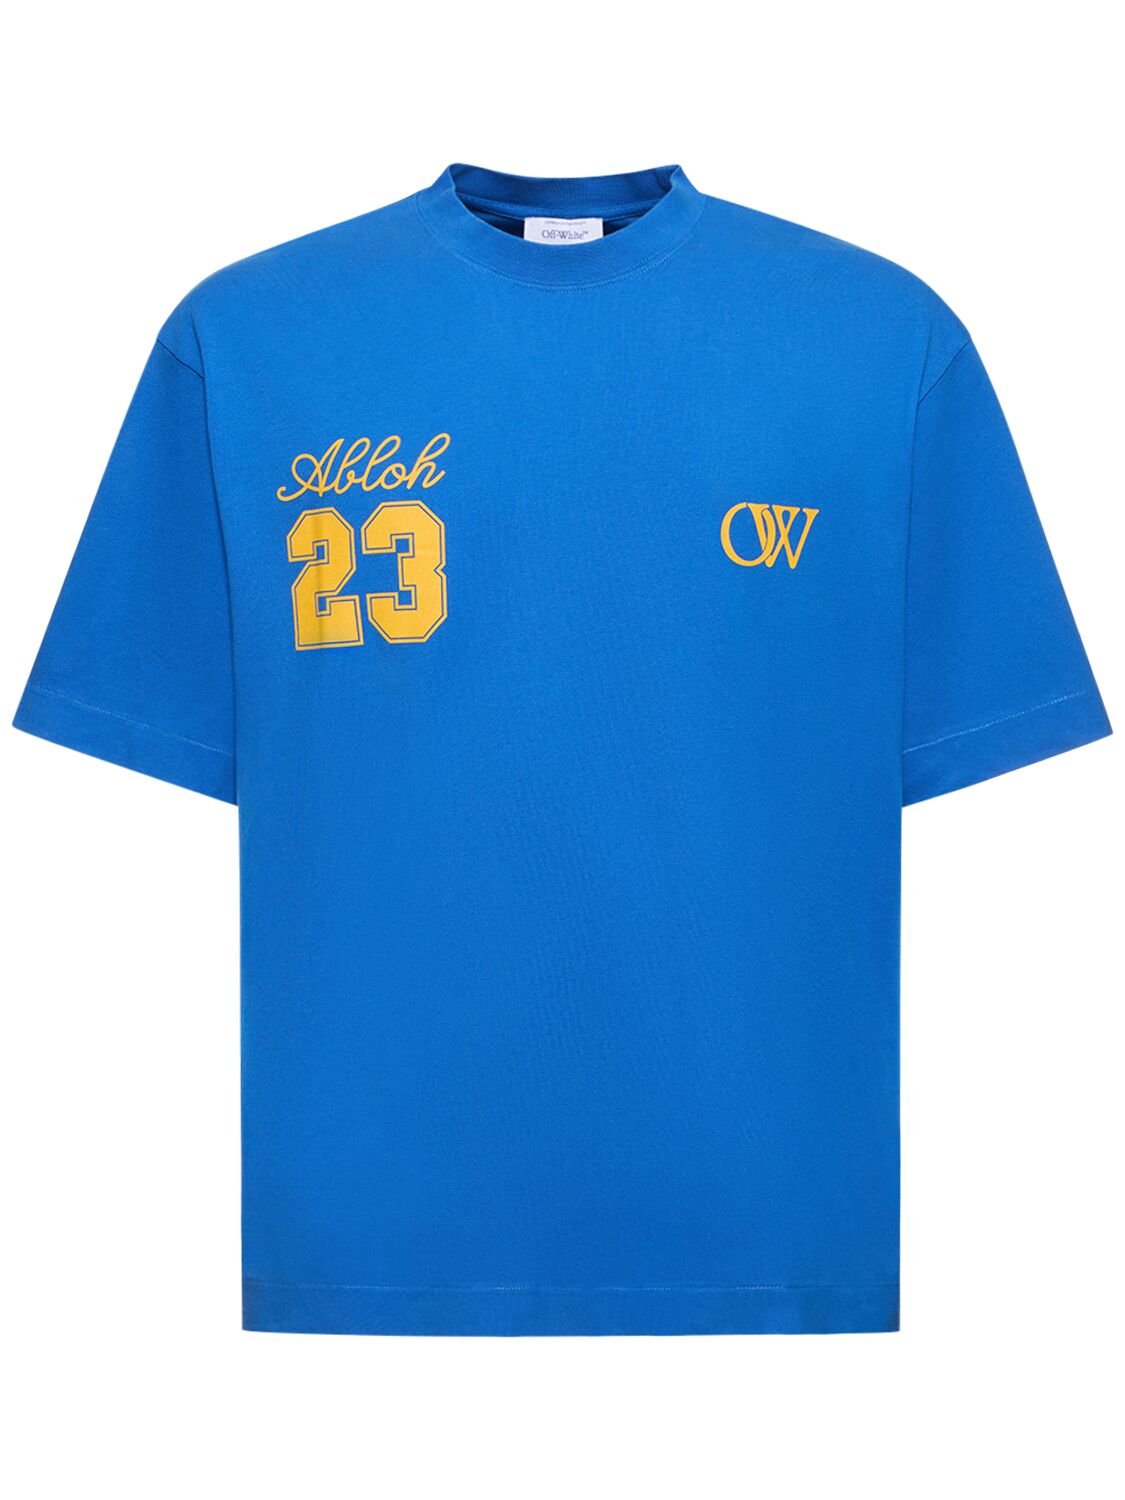 Image of Ow 23 Skate Cotton T-shirt